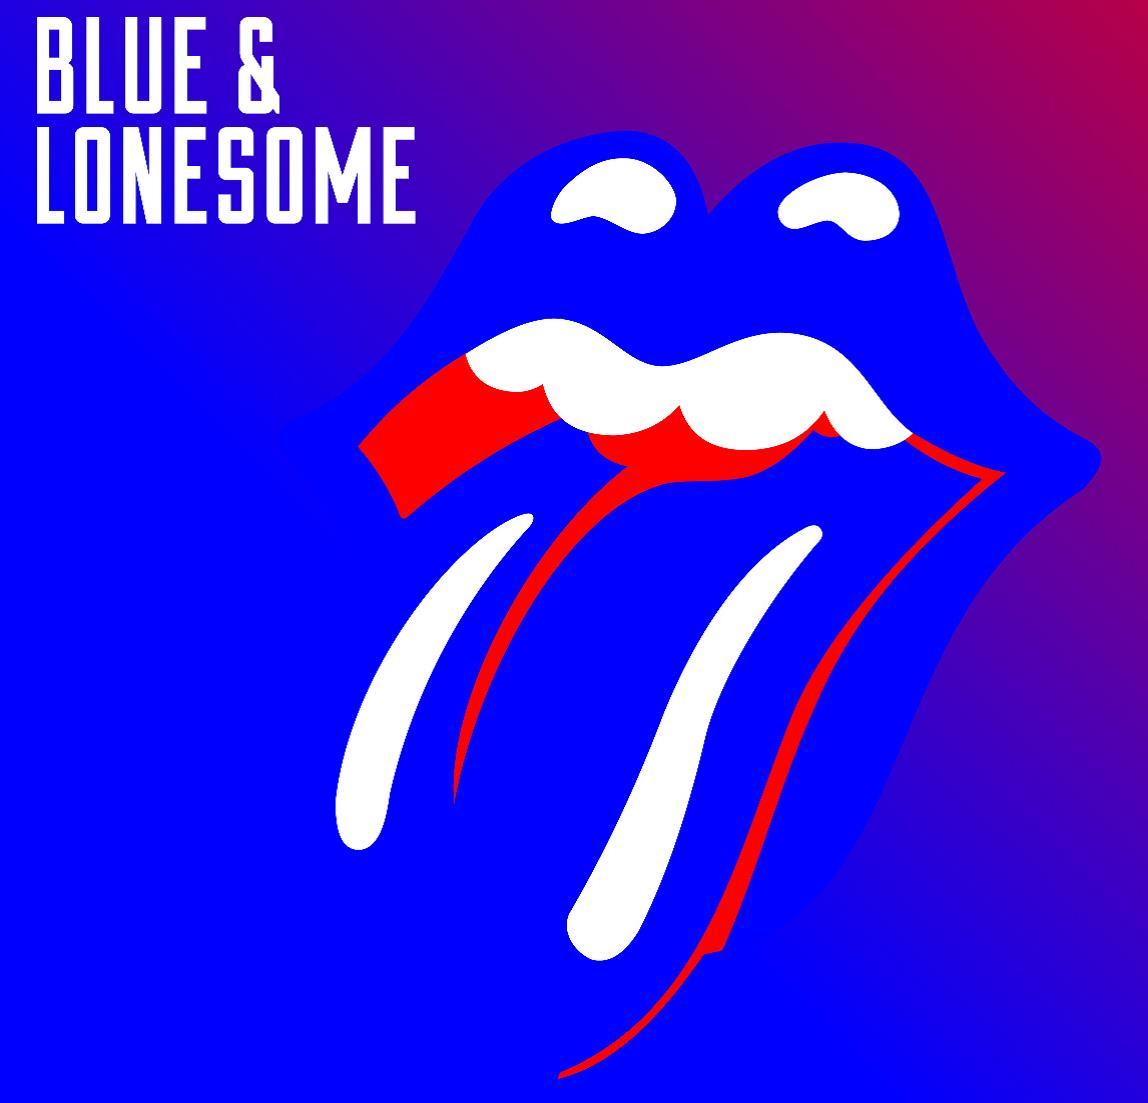 THE ROLLING STONES - BLUE & LONESOME - THE ROLLING STONES - CD -